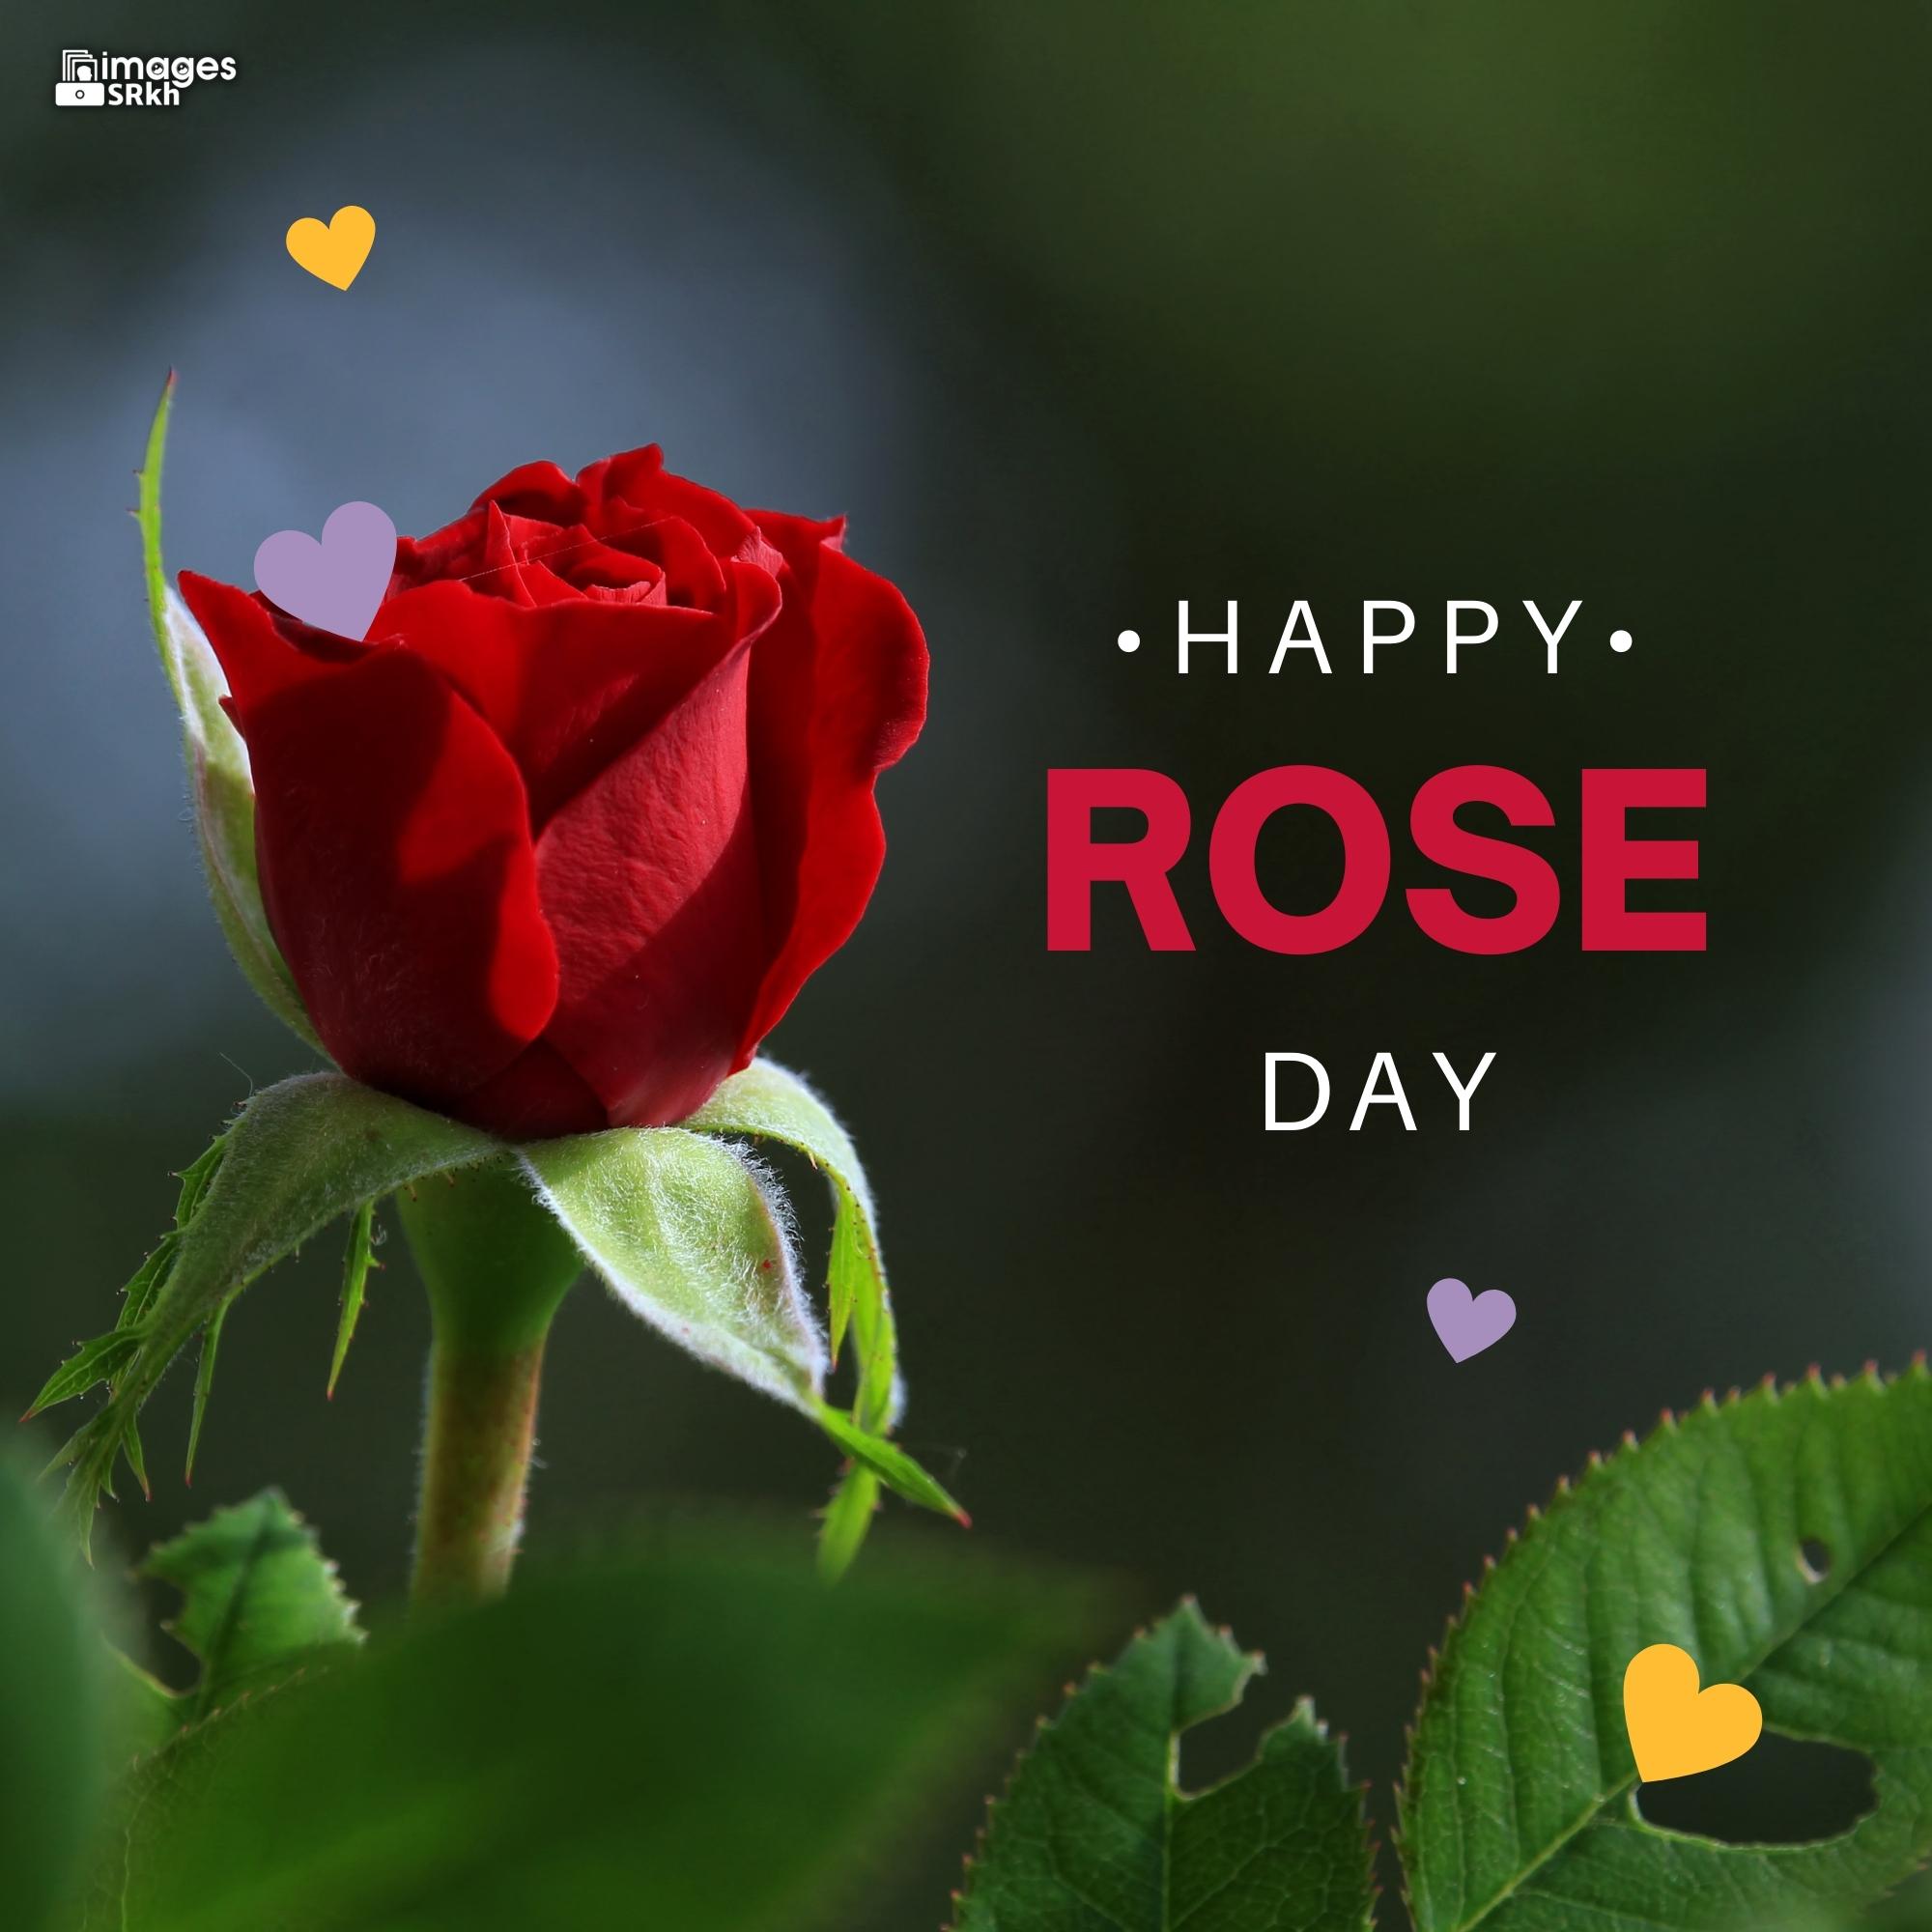 Happy Rose Day Image Hd Download (76)